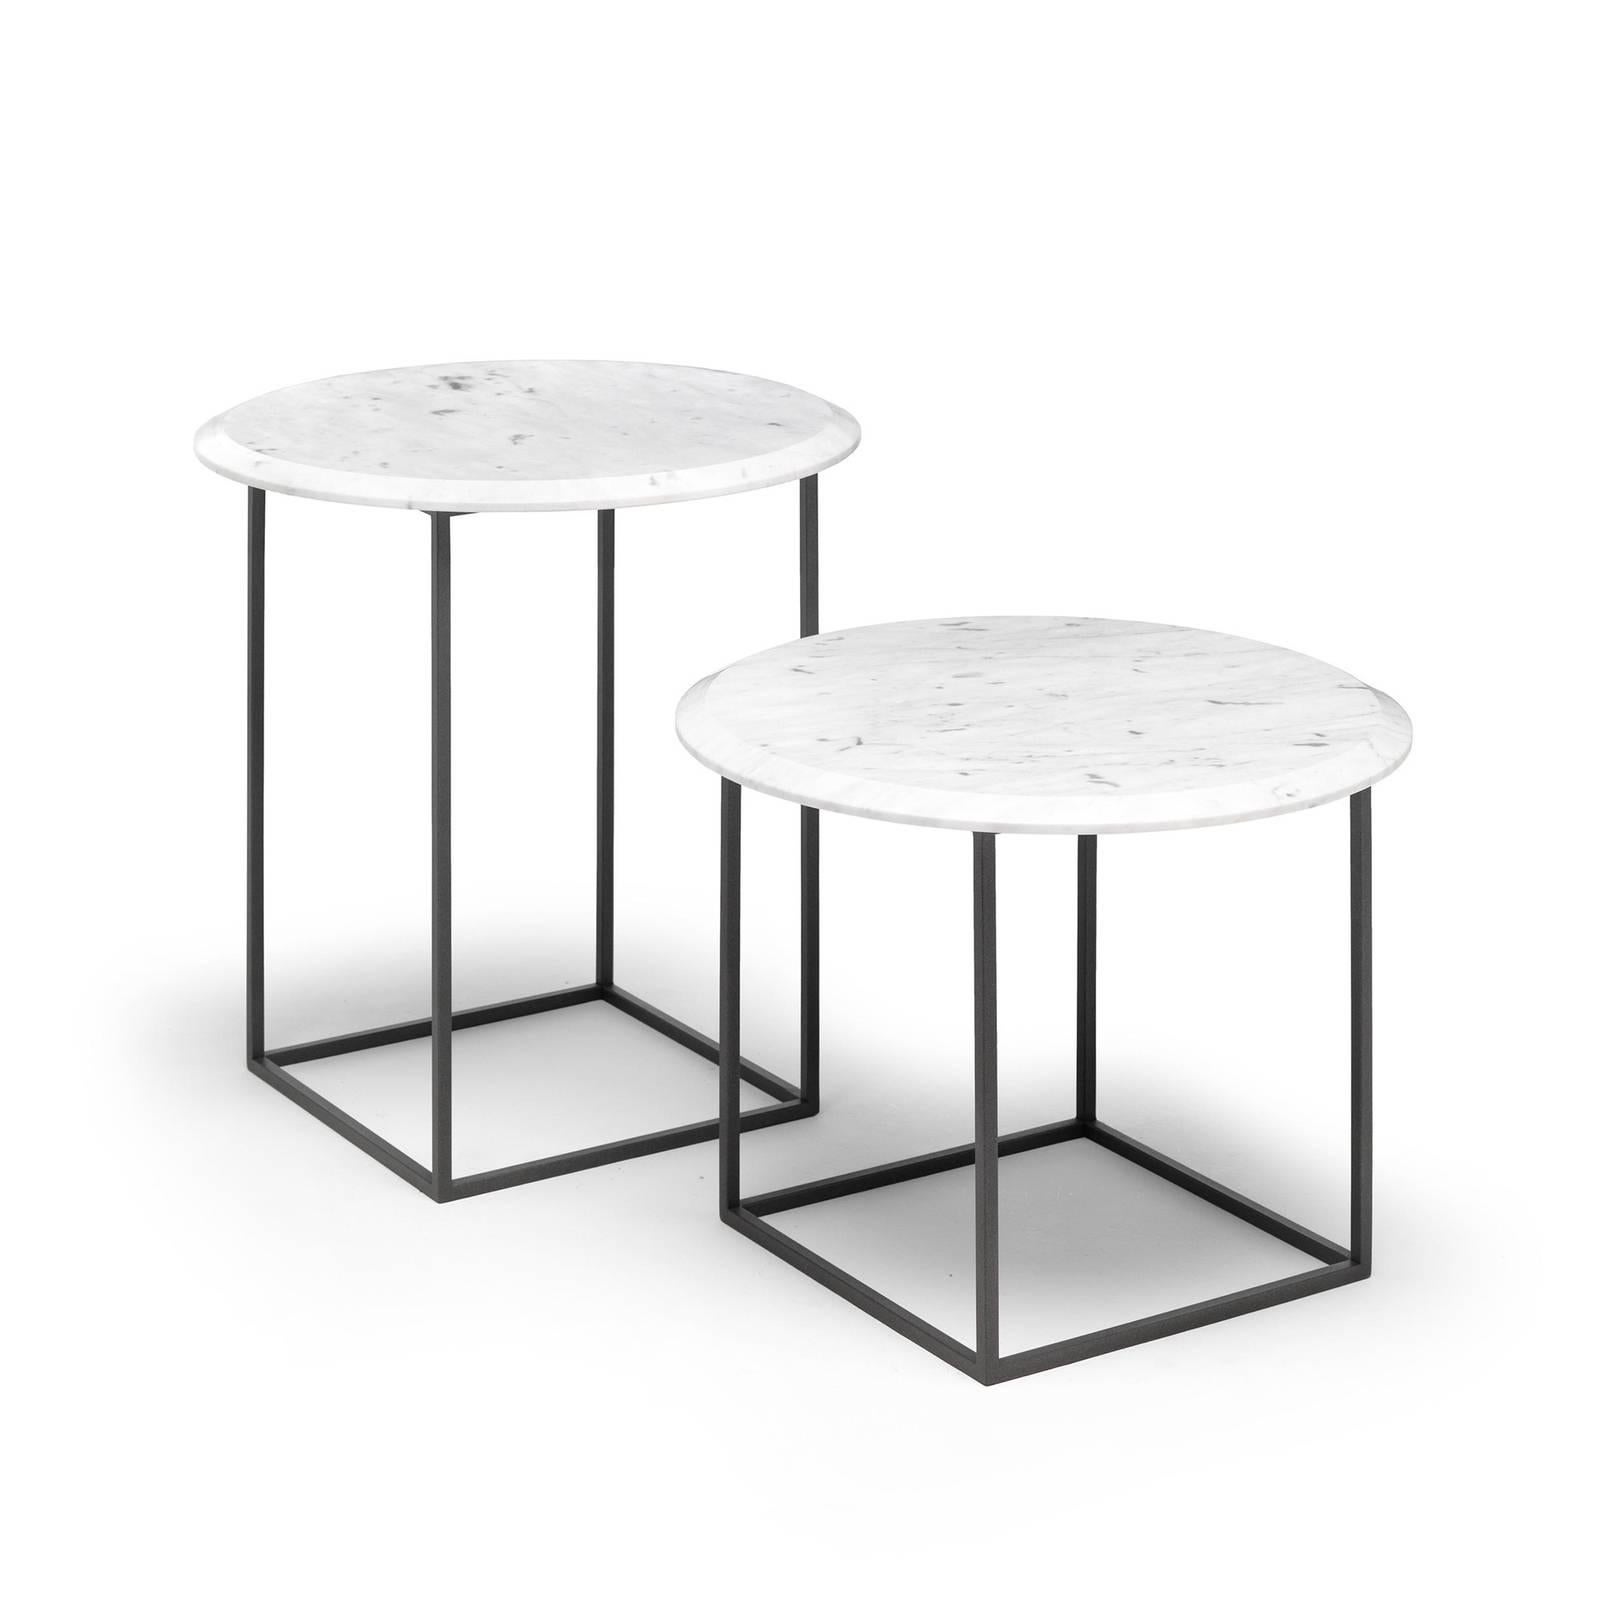 This elegant and modern side table is part of the Gotham collection, designed in 2017 by Federico Carandini. It boasts a light and Minimalist structure in grey-colored metal with a square section that supports a round top in Carrara marble. The